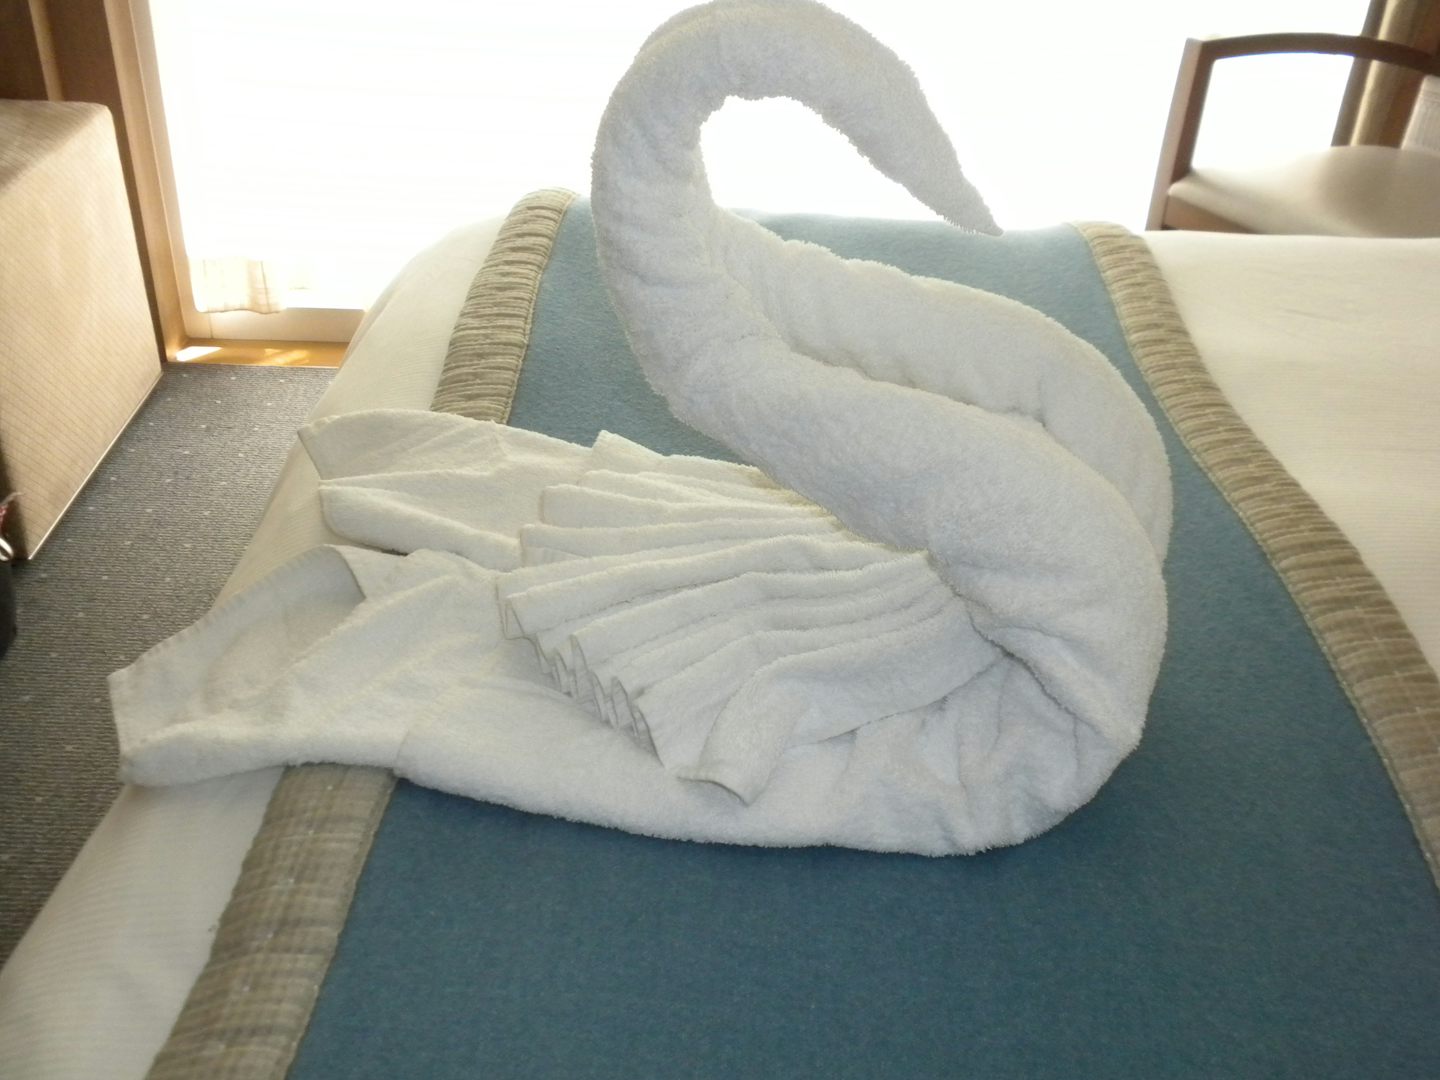 Cabin art..a towel swan made by our wonderful attendant